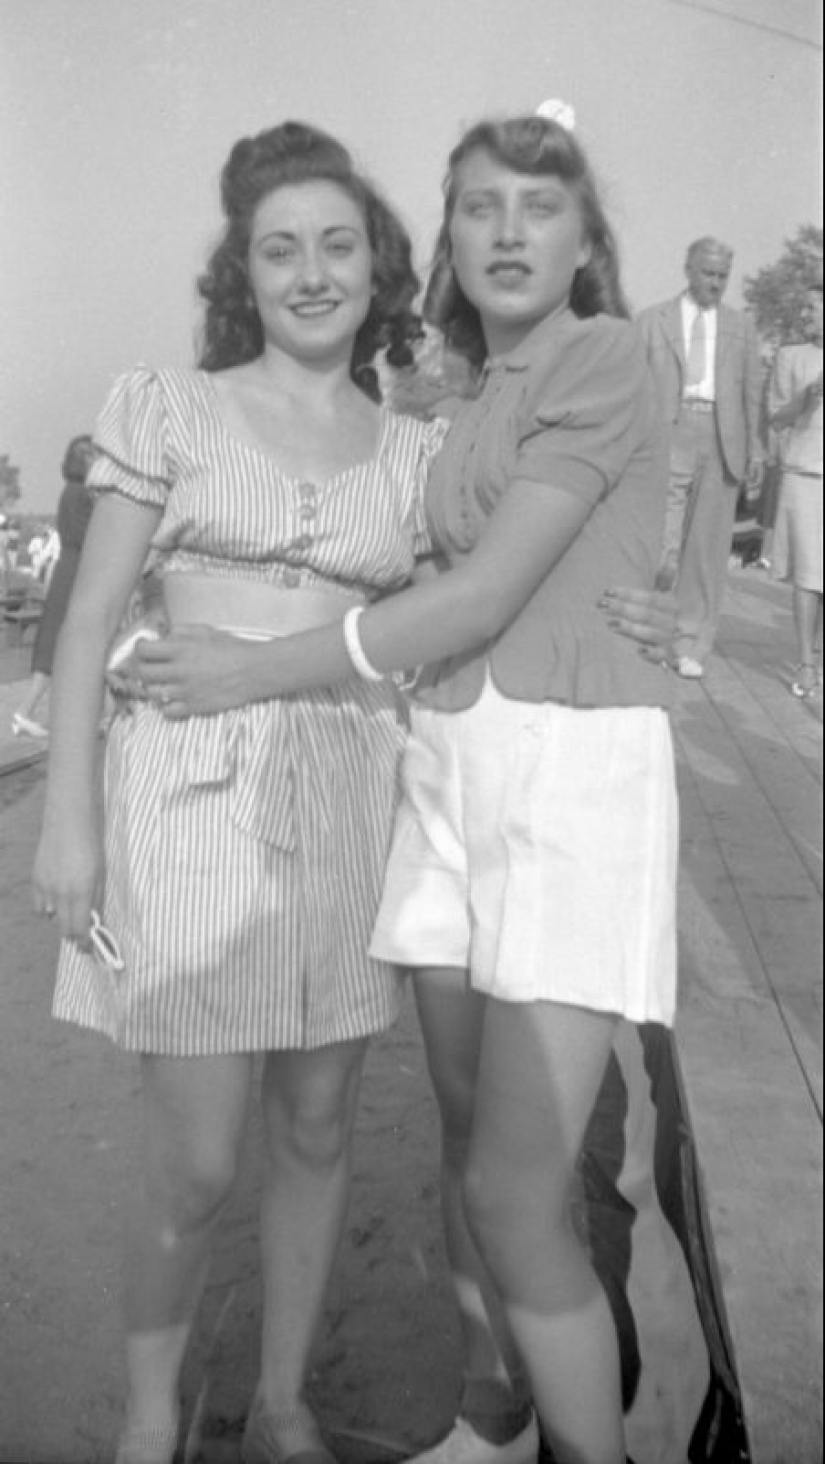 Photos of girls of the 40s in short tops and shorts